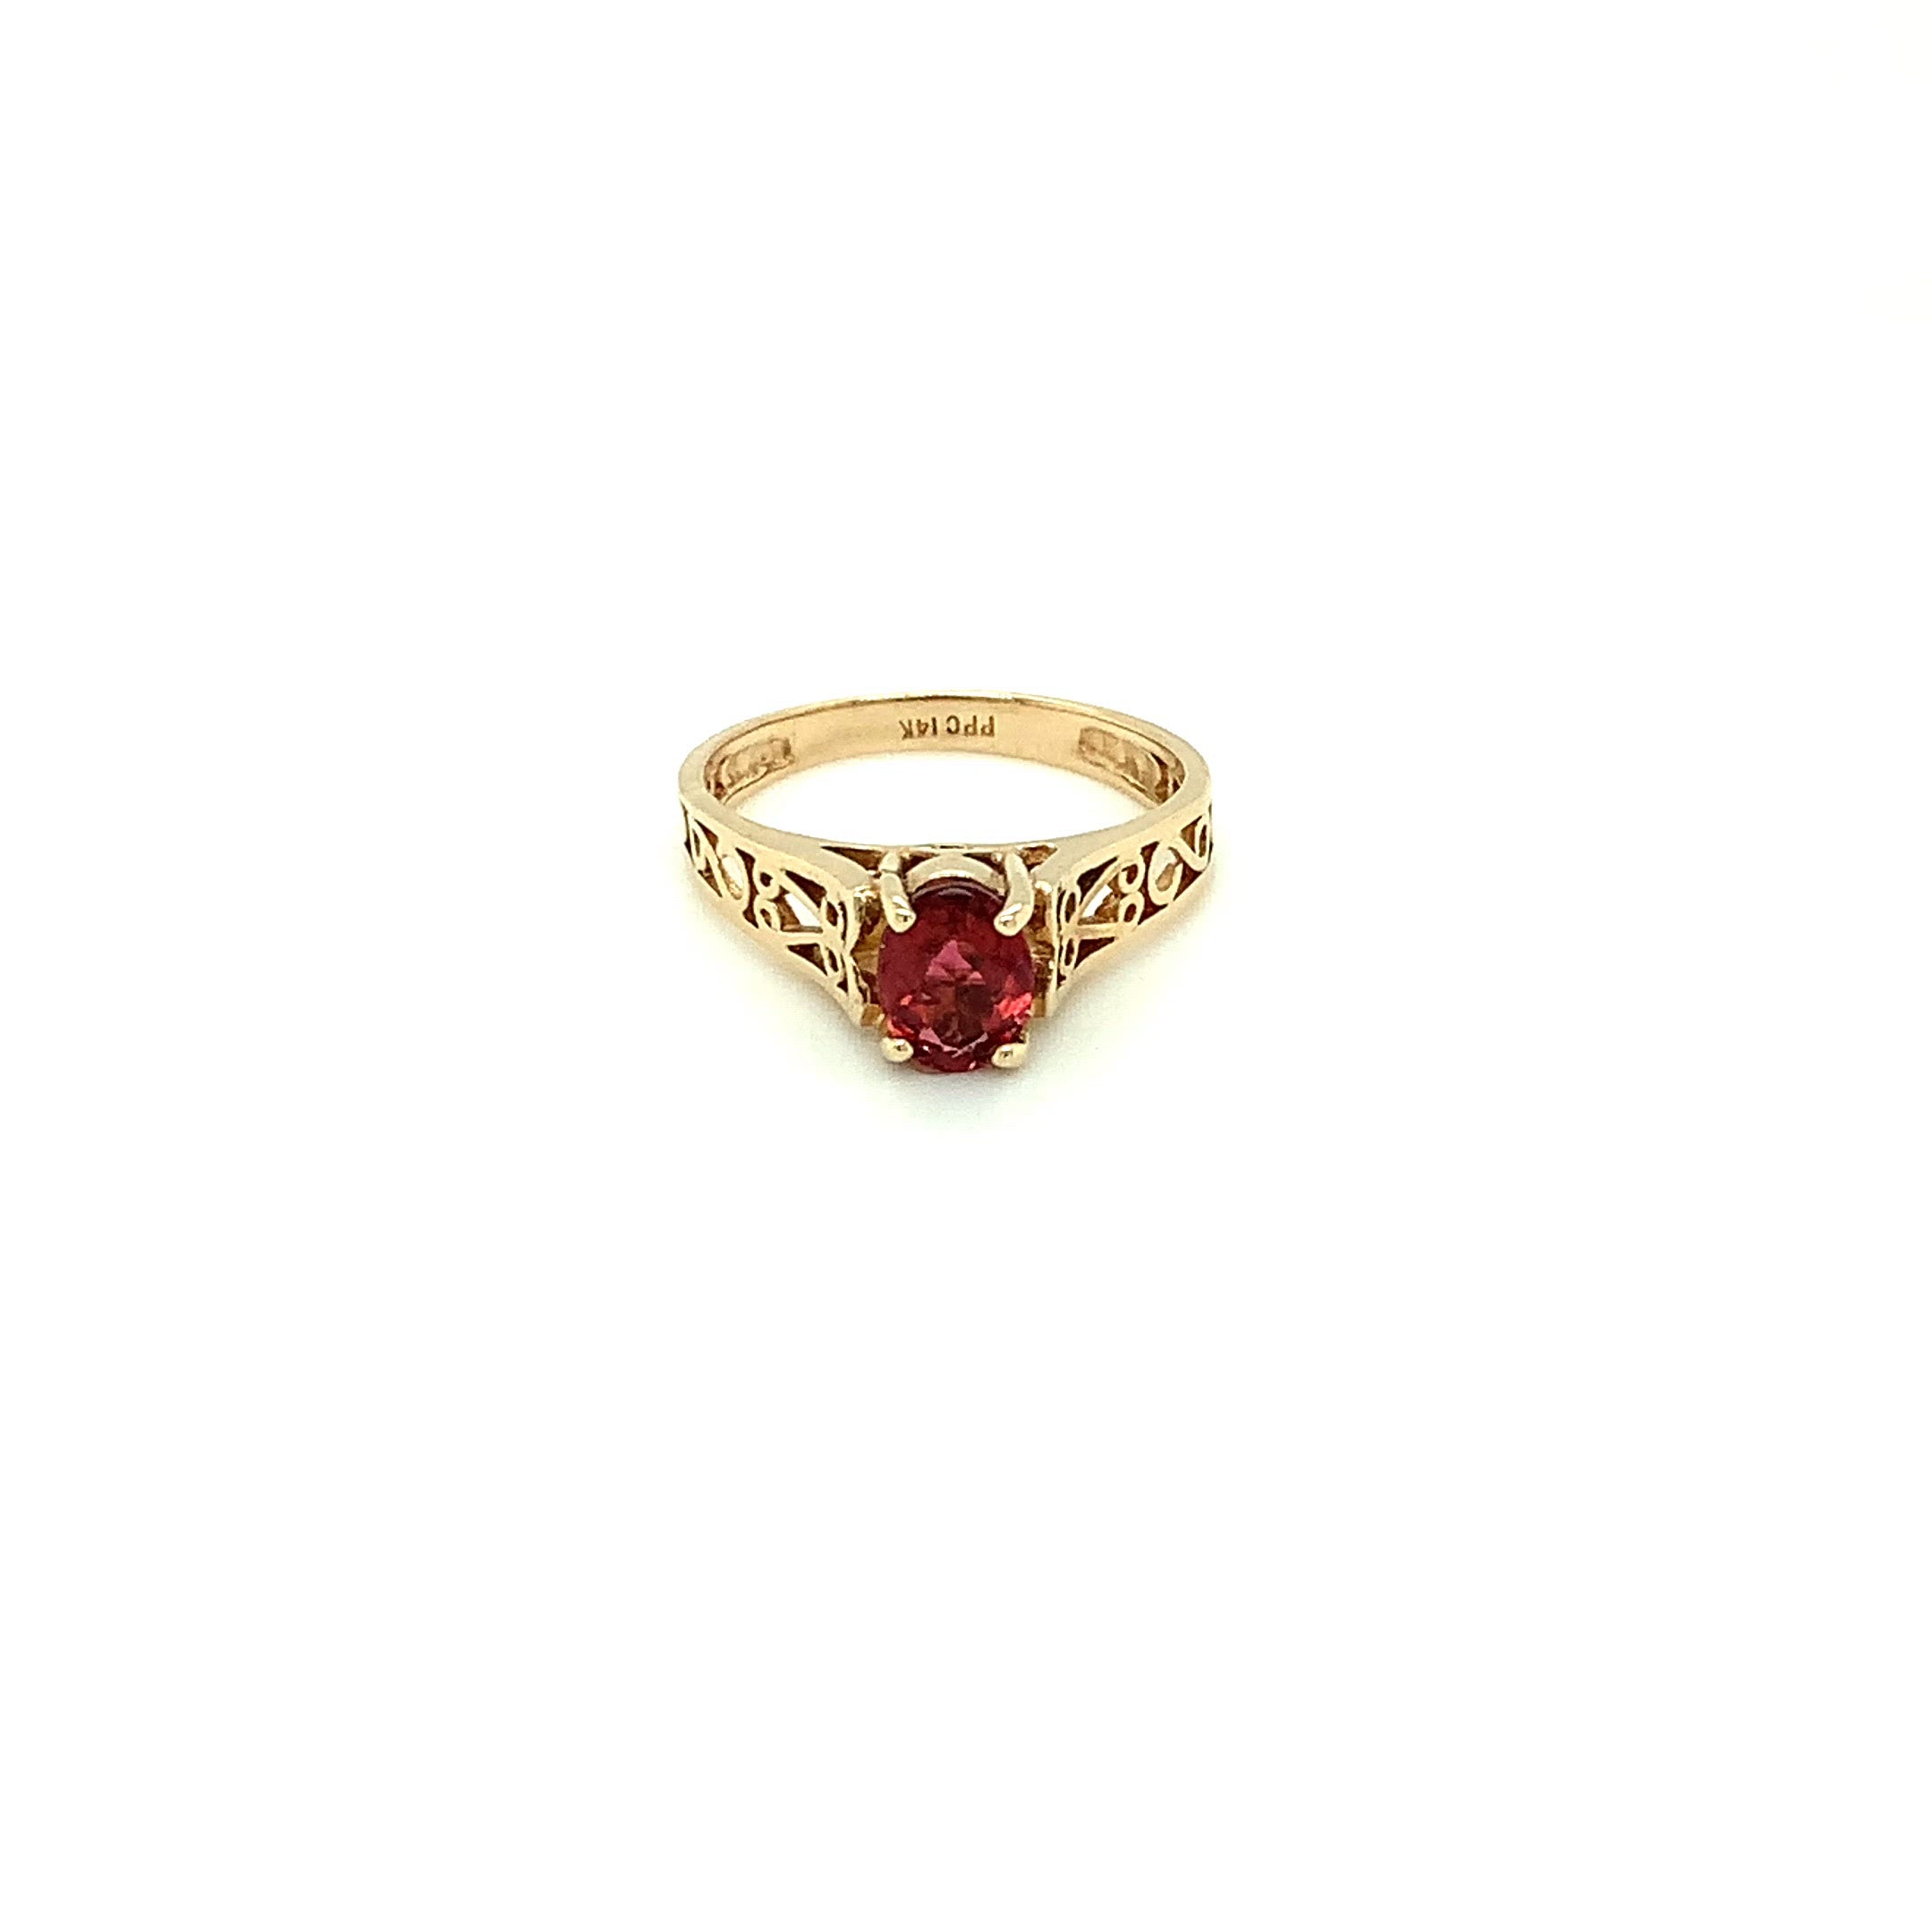 Natural Rubellite Ring 14K Solid Gold 1ct Pink Tourmaline Ring Antique Ring Vintage Ring Solitaire Ring Women's Ring Birthstone Ring Jewelry